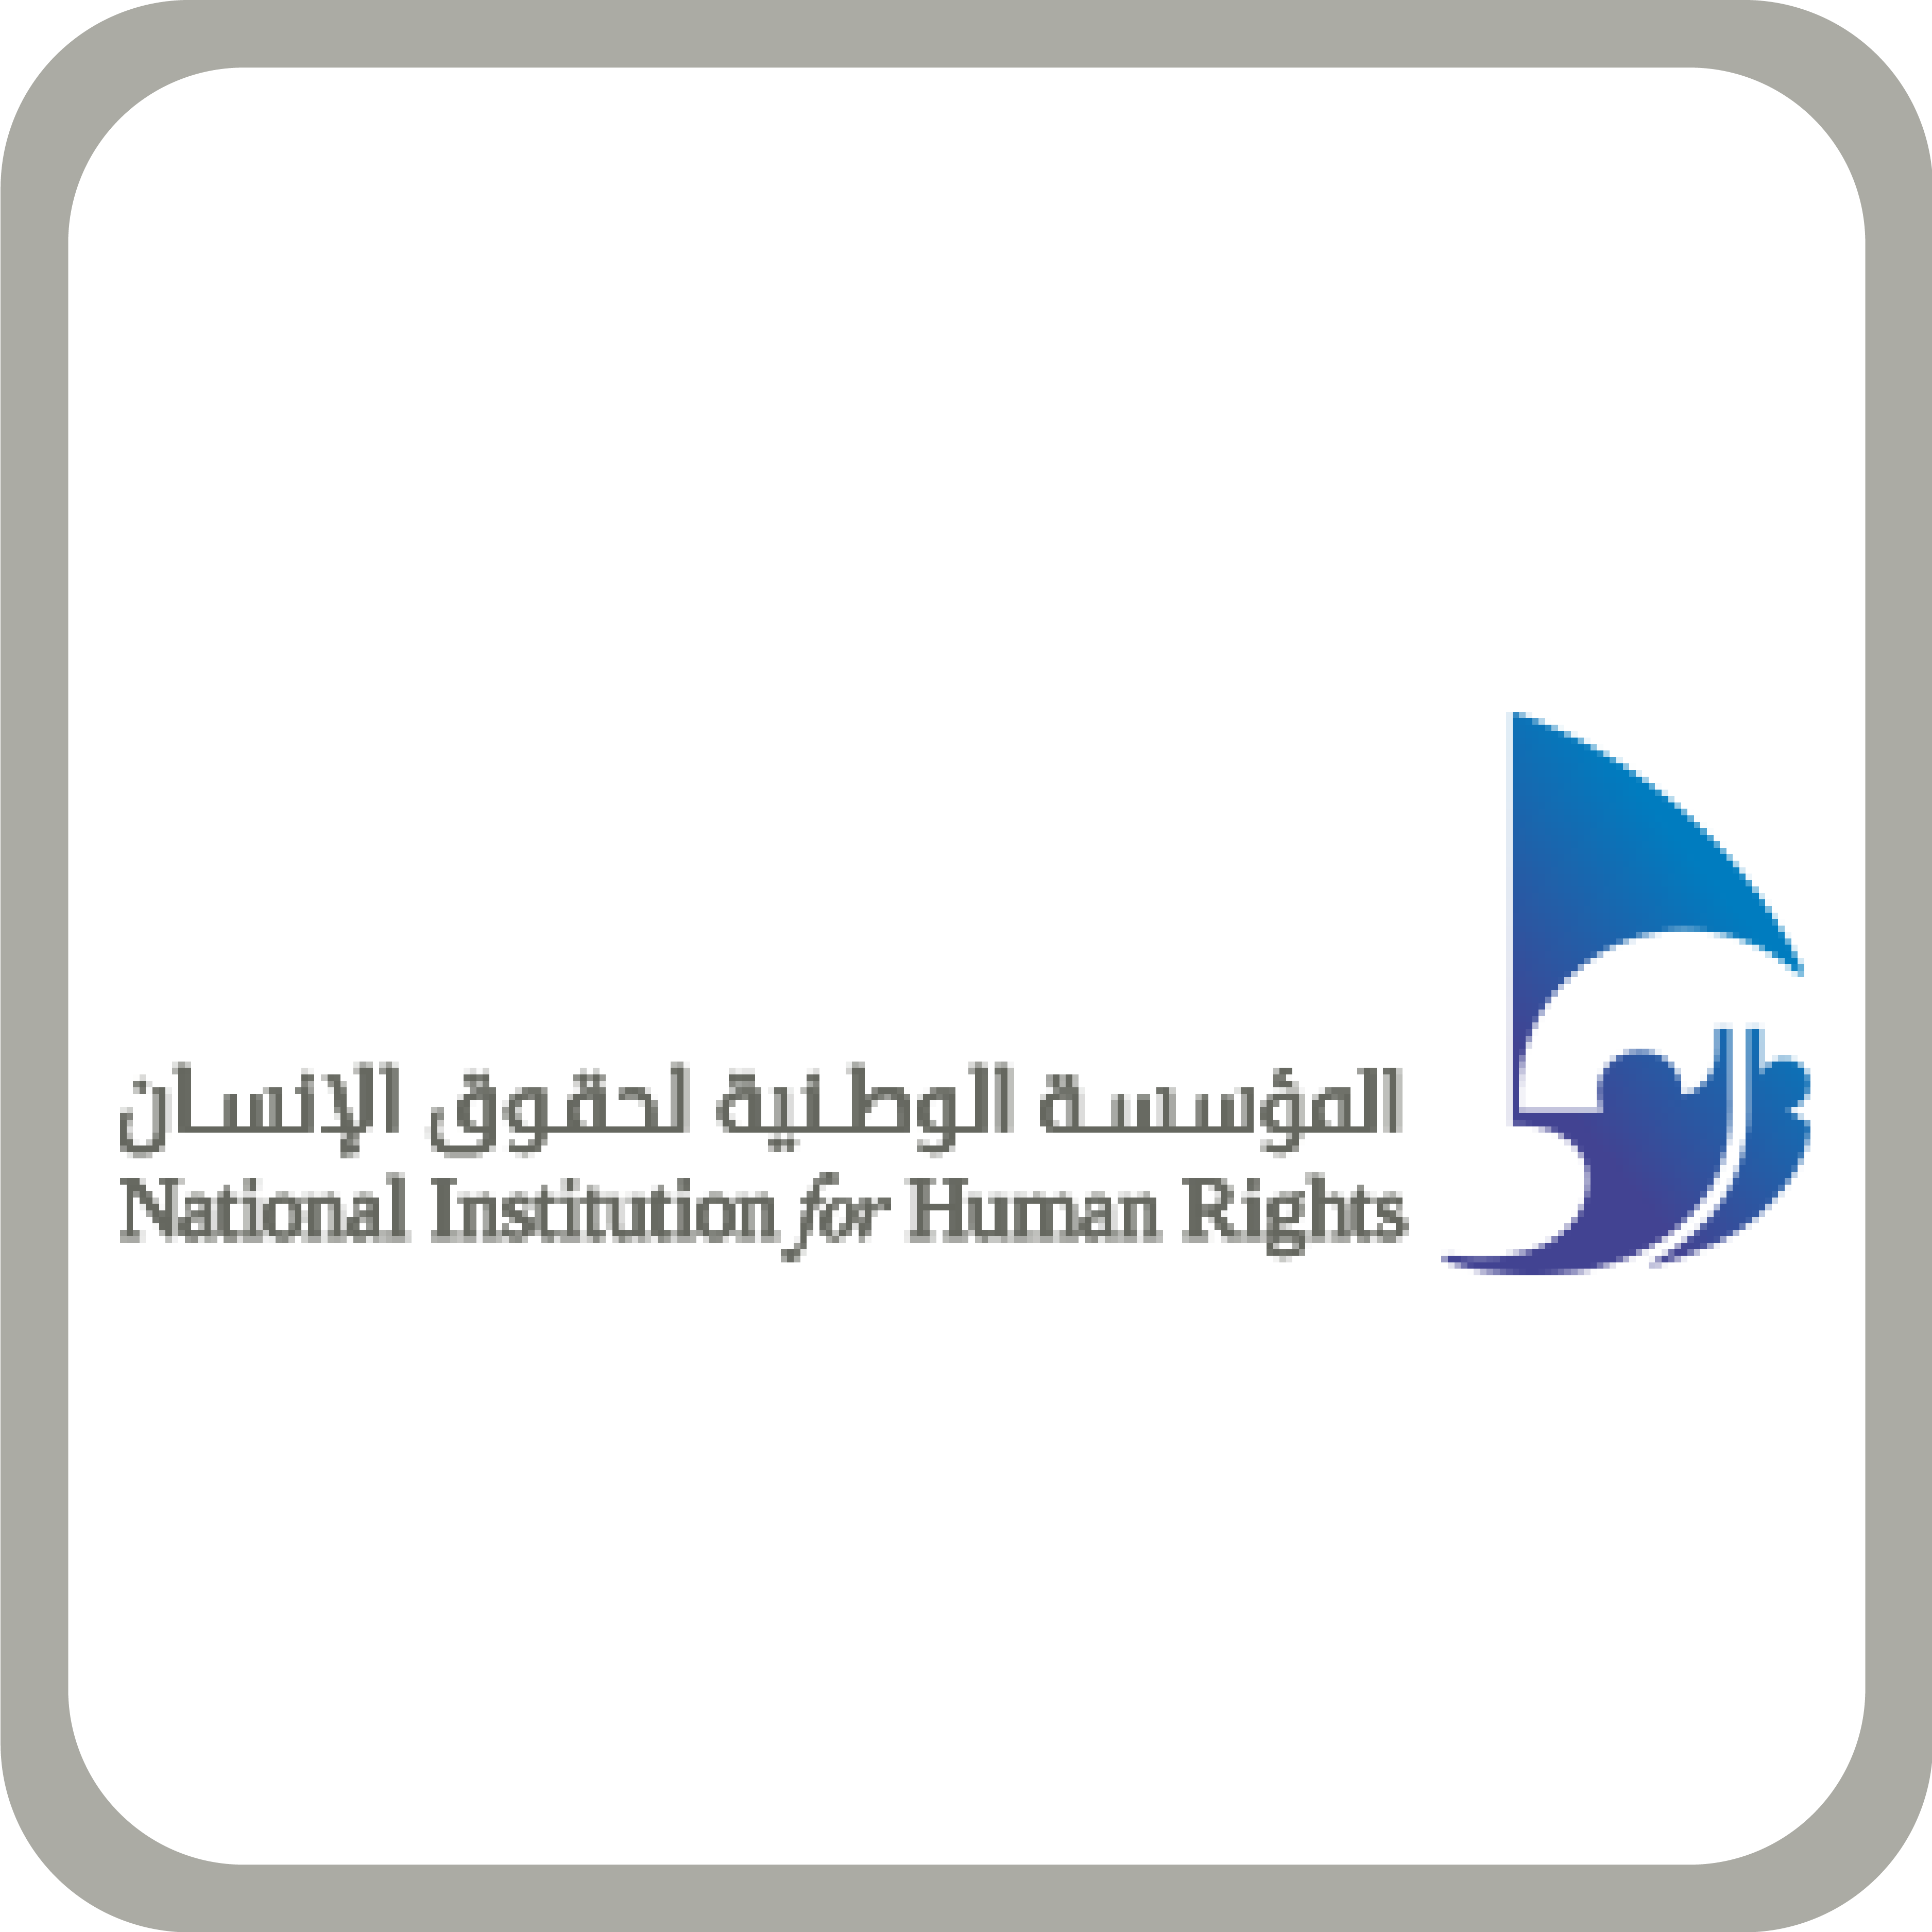 National Institute for Human Rights